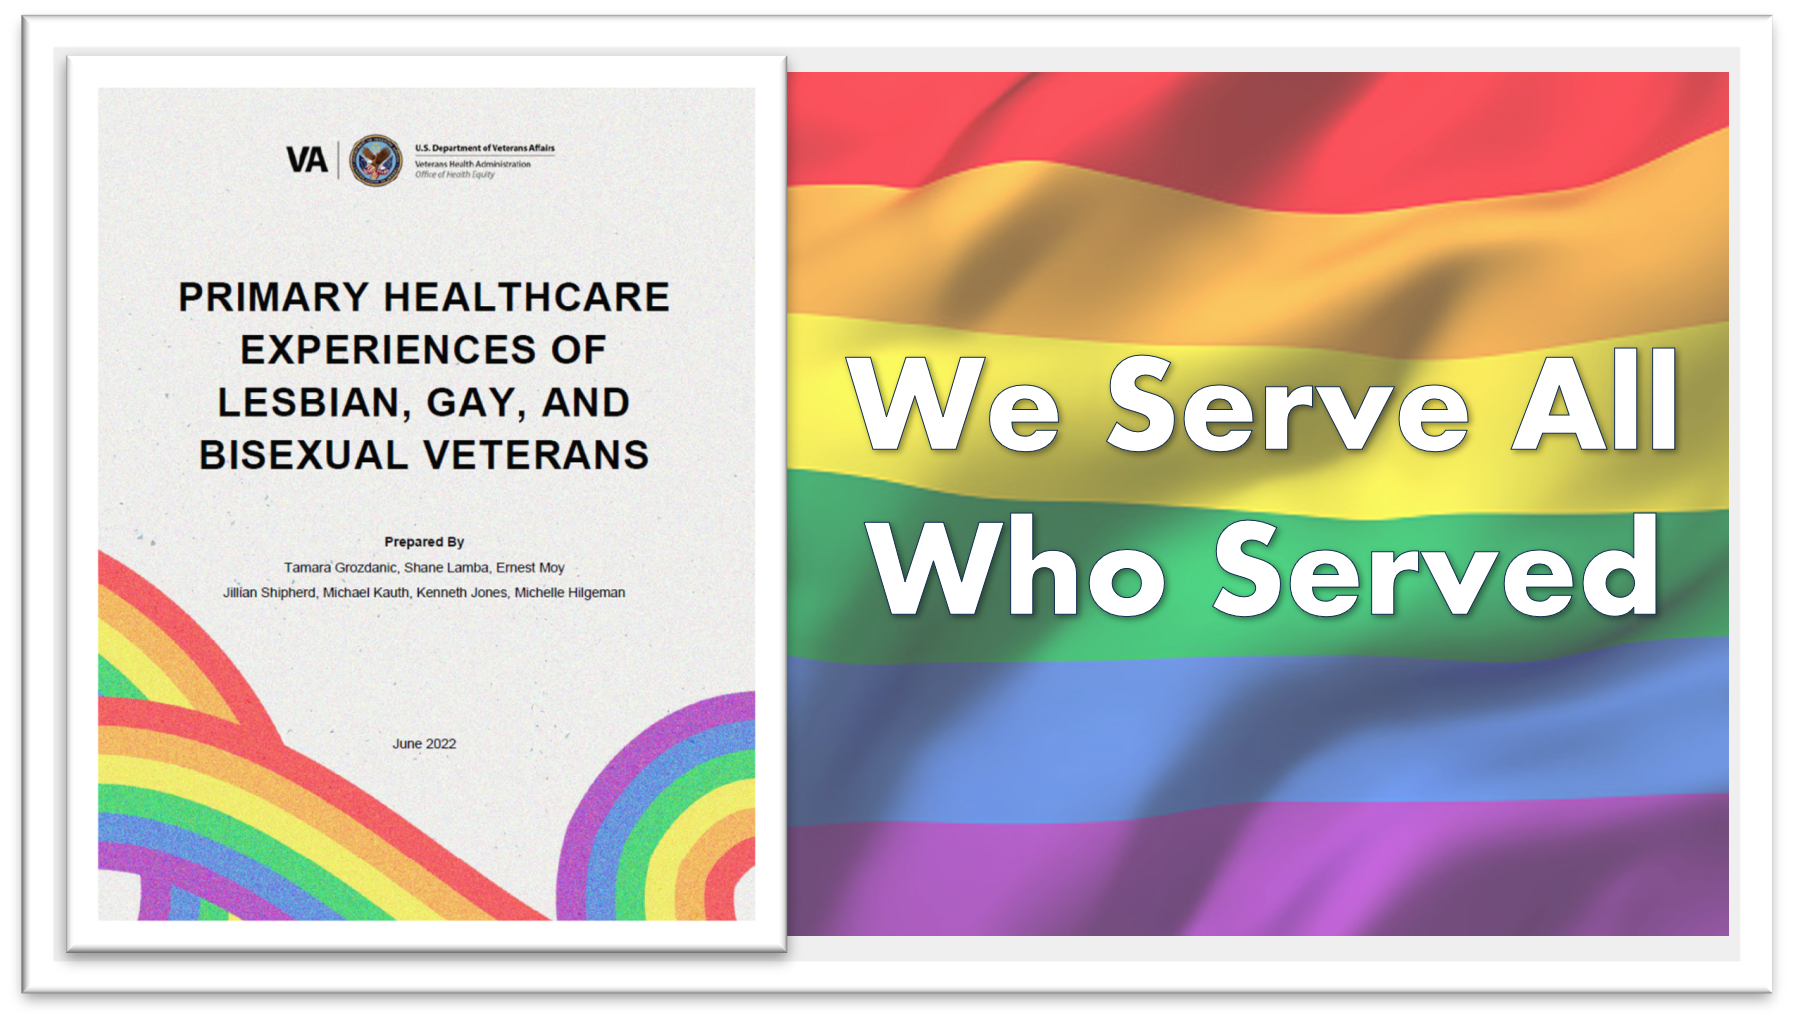 Primary Healthcare Experiences of Lesbian, Gay, and Bisexual Veterans